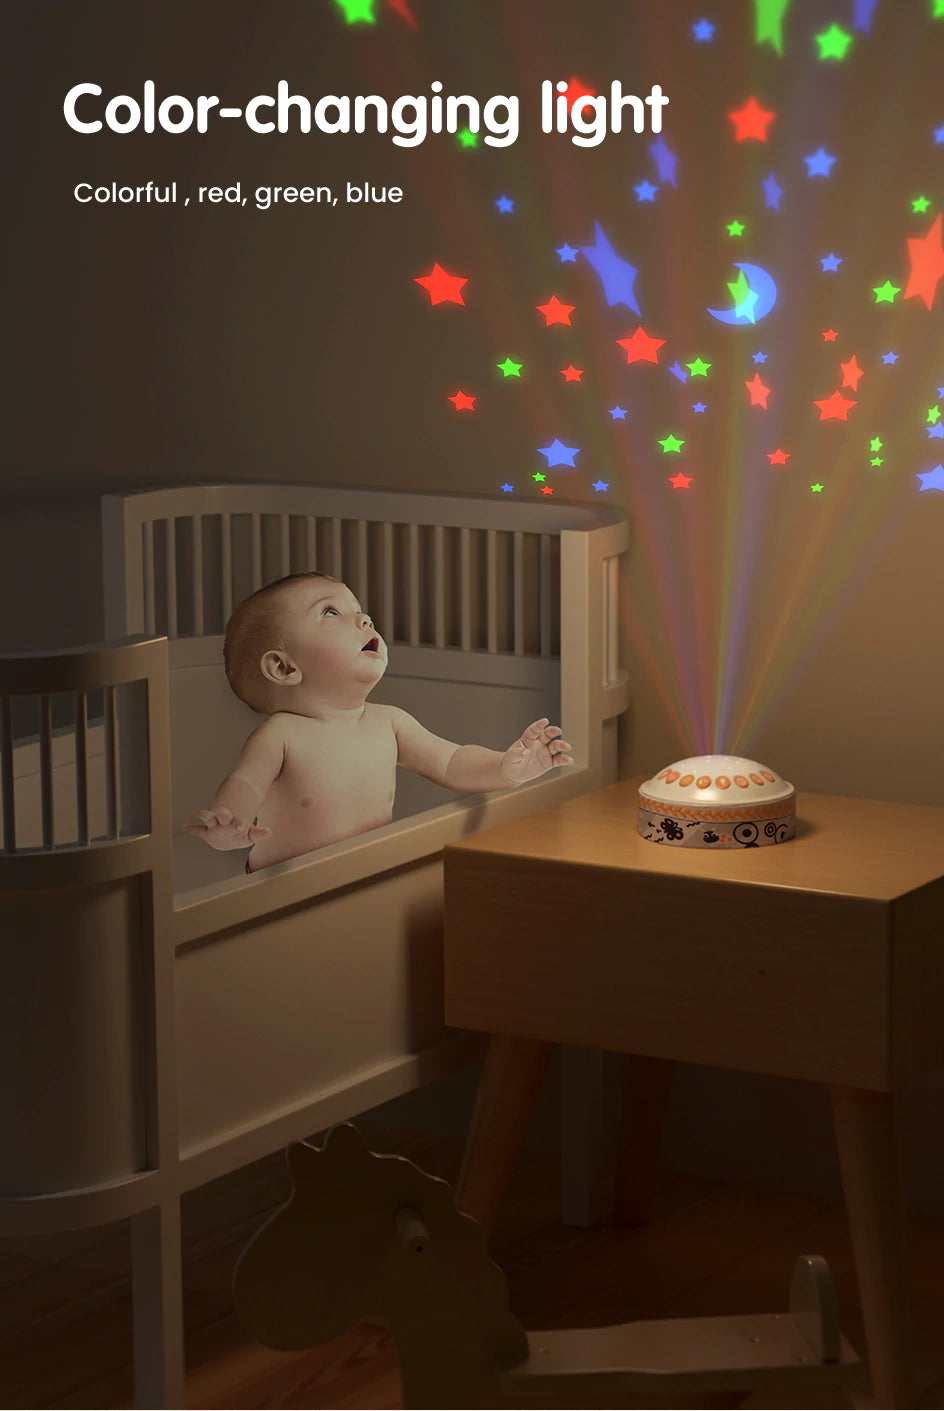 Musical toy for baby_s calming bedtime